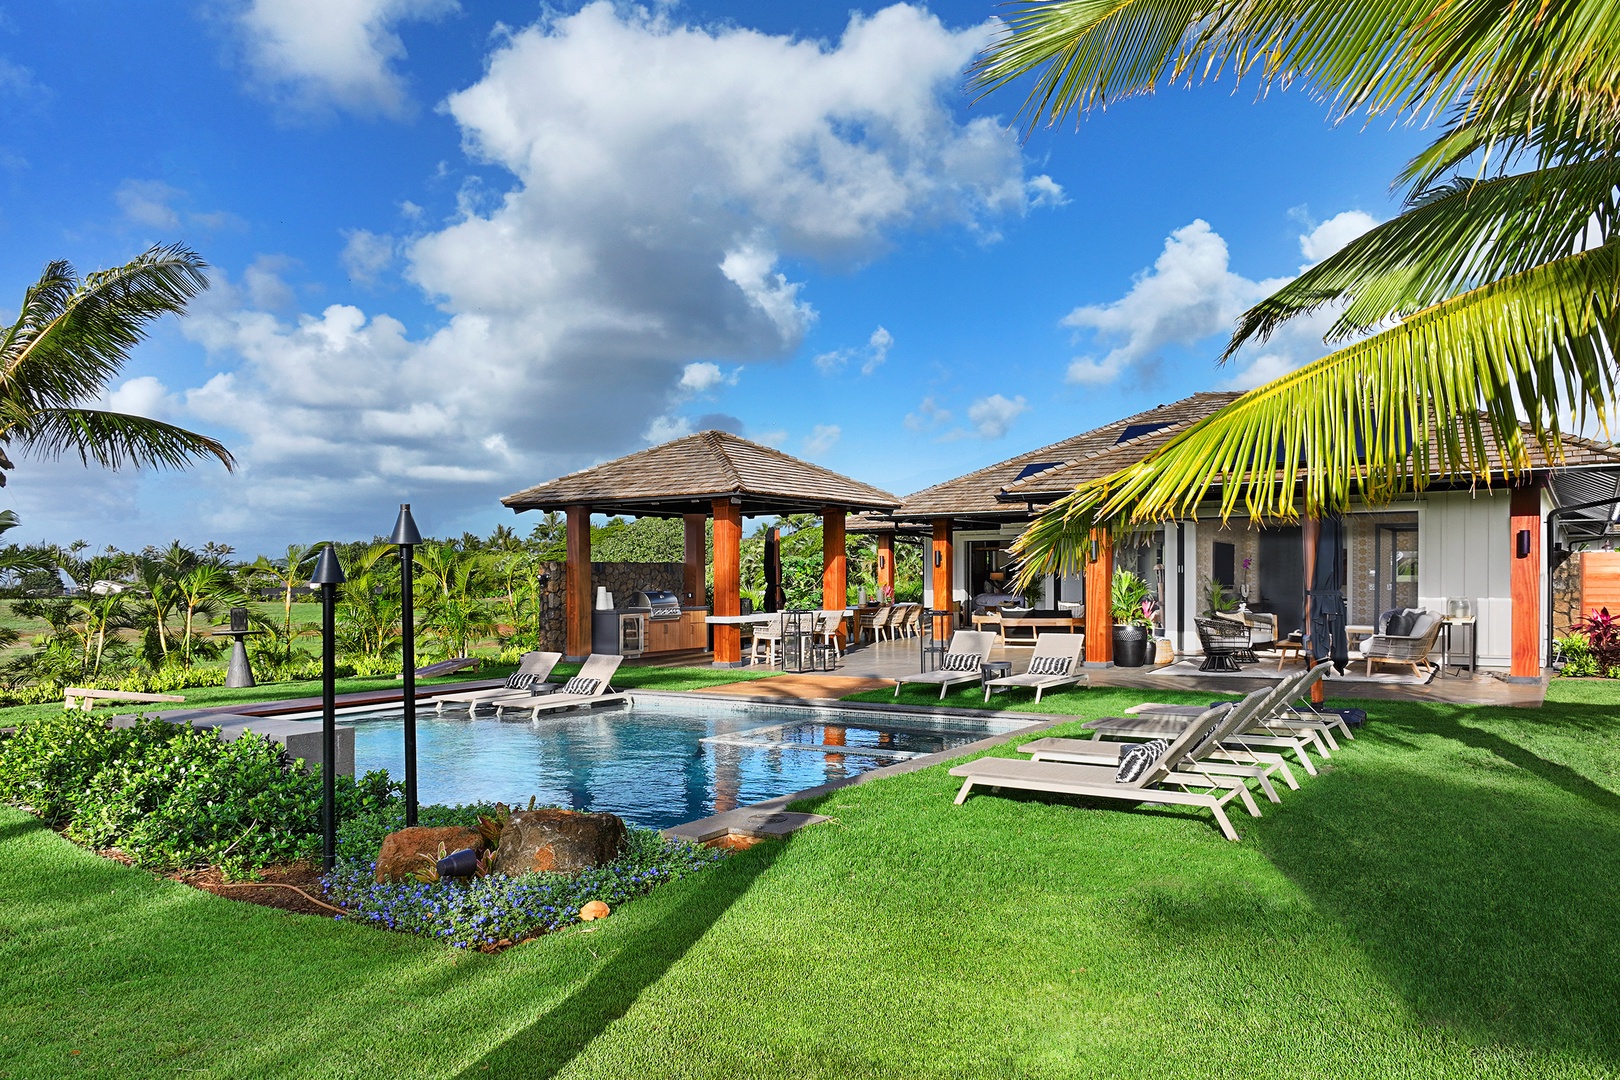 Koloa Vacation Rentals, Hale Pakika at Kukui'ula - Immerse yourself in luxury with this pool and spa combo, featuring lounging areas and tropical landscaping.